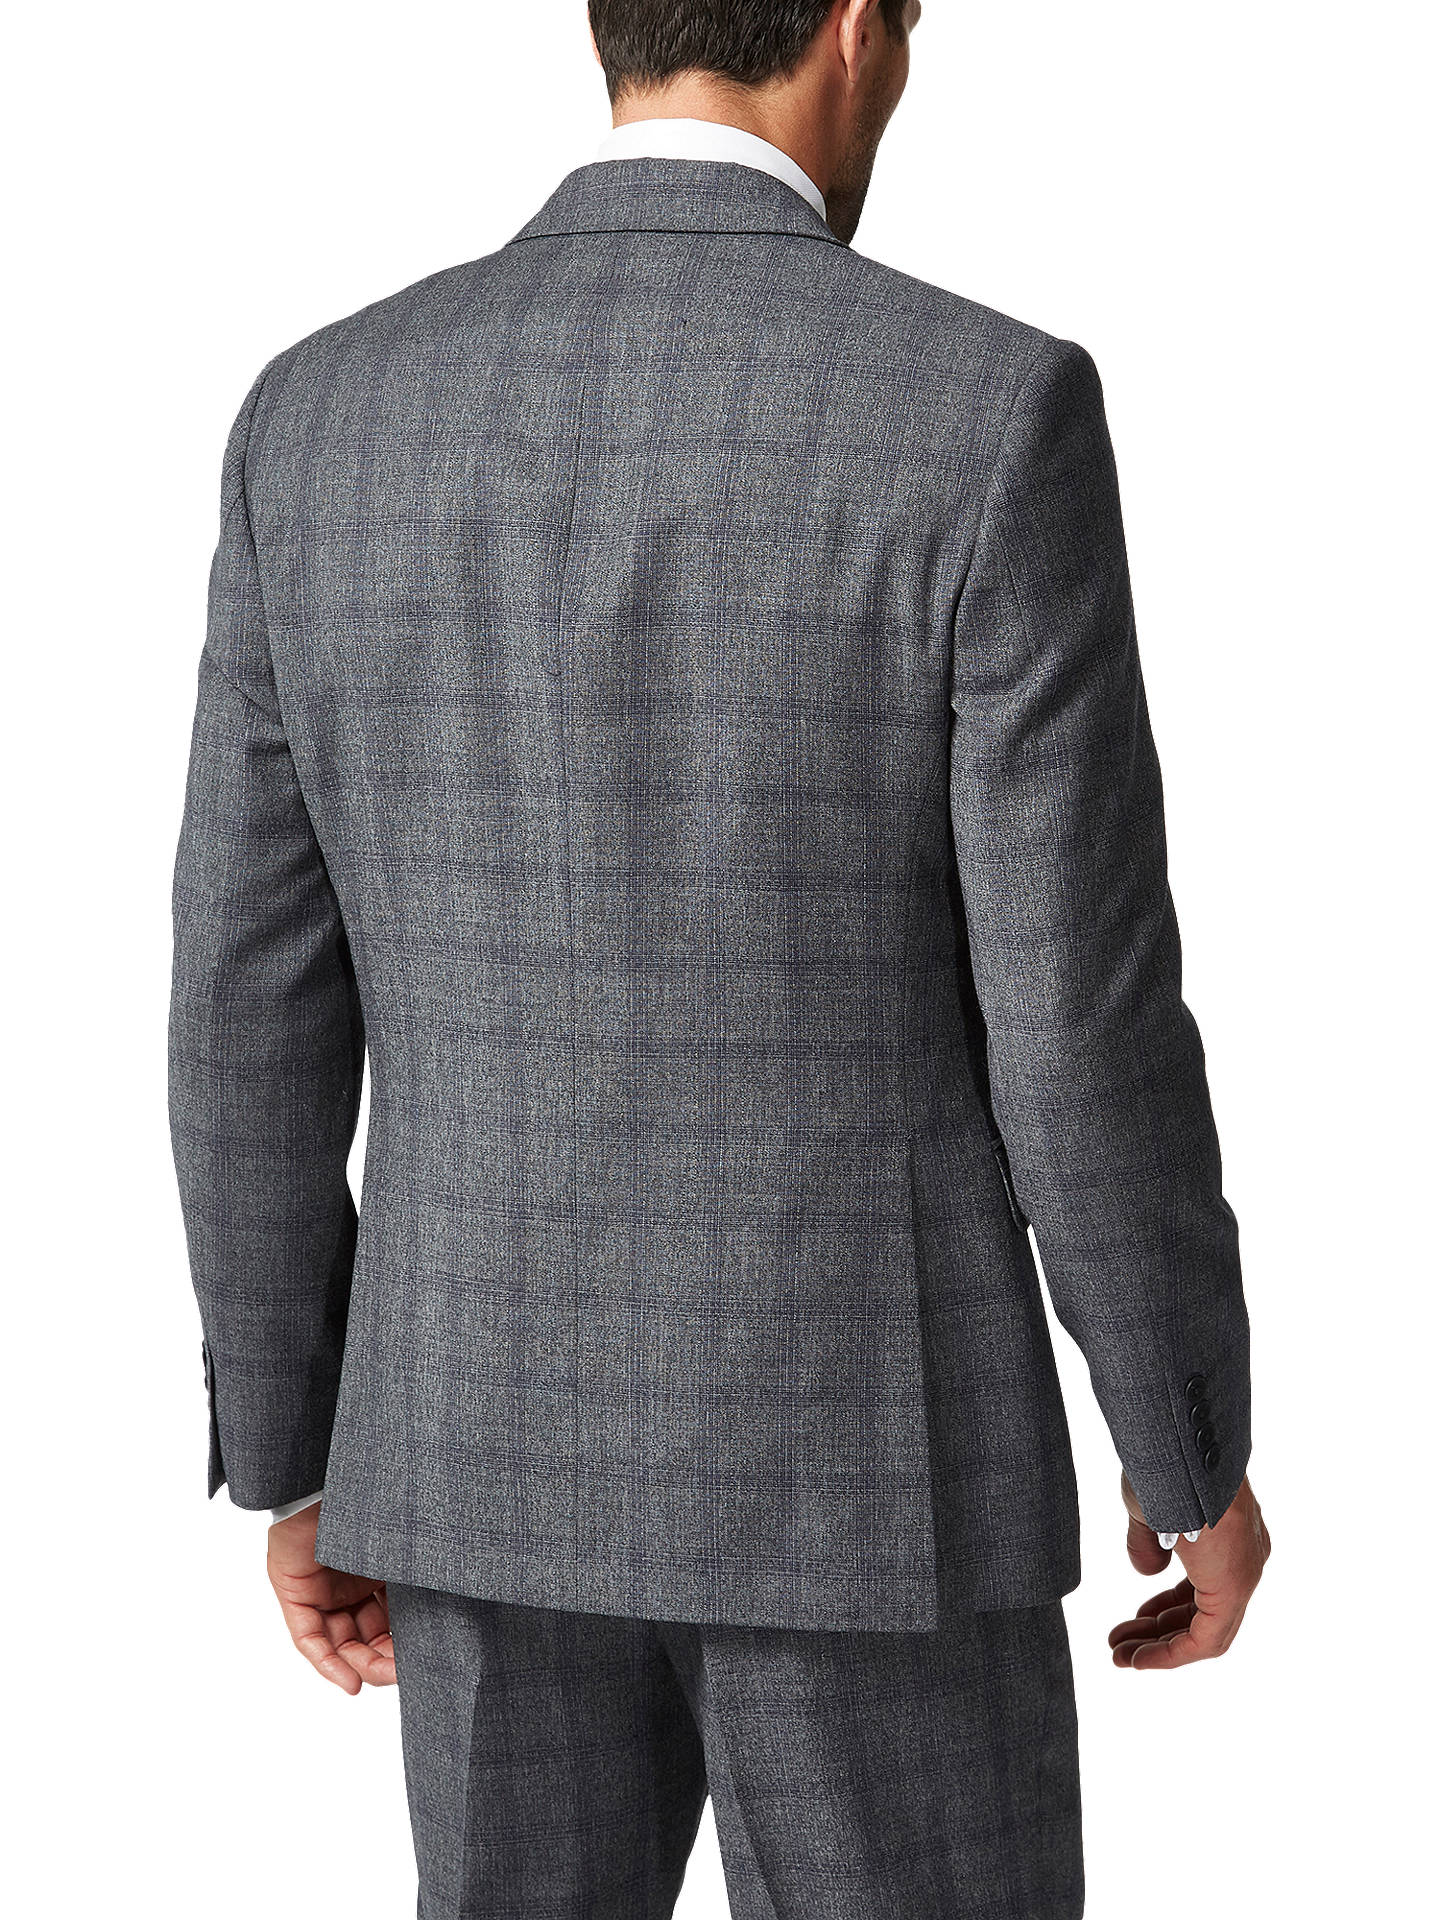 Chester by Chester Barrie Prince of Wales Check Suit Jacket, Charcoal ...